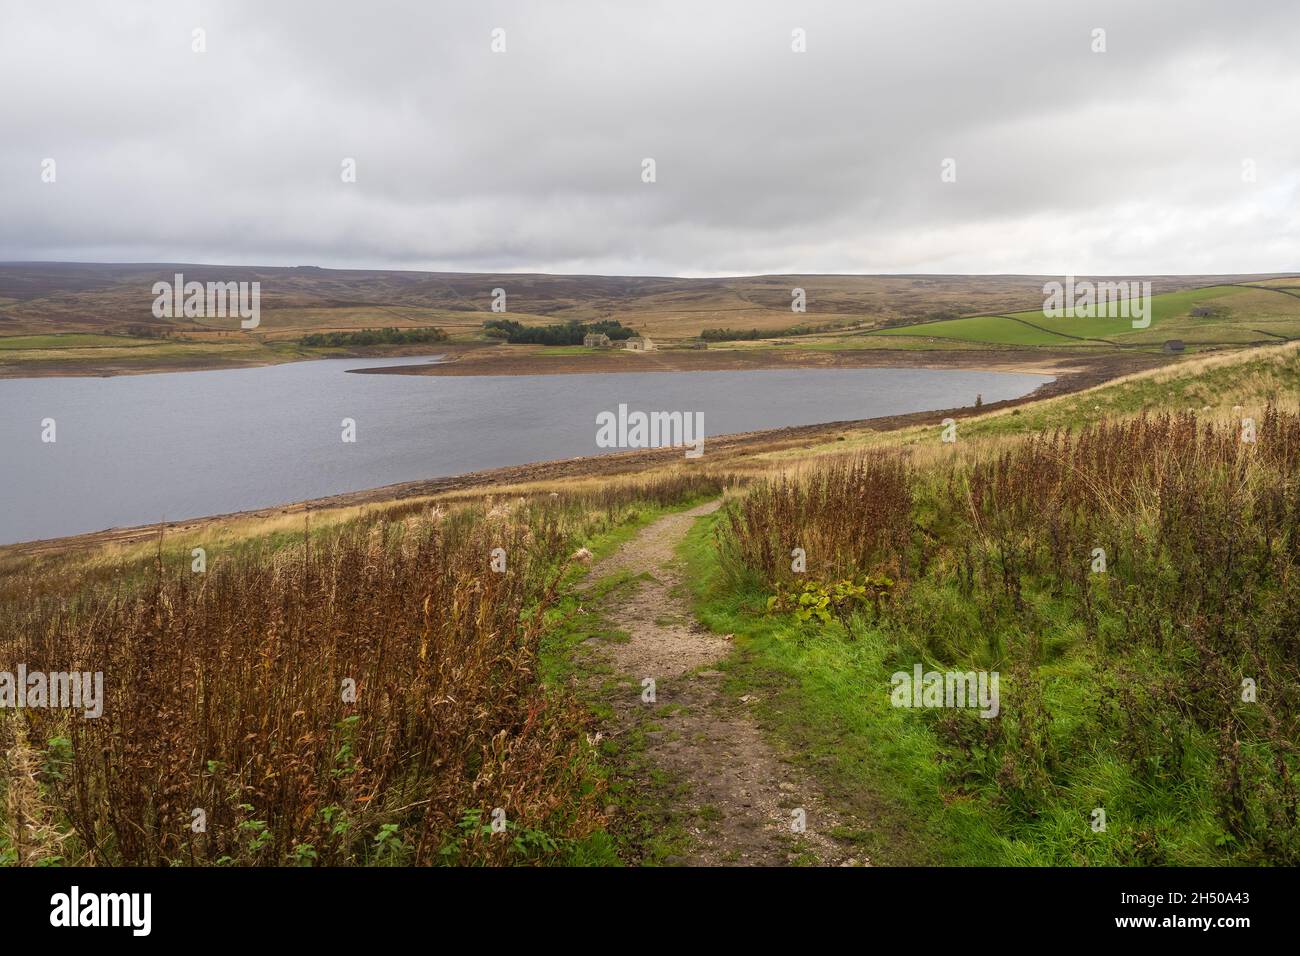 Grimwith Reservoir is located in the Yorkshire Dales in North Yorkshire, England. It was originally built by the Bradford Corporation as one of eleven Stock Photo